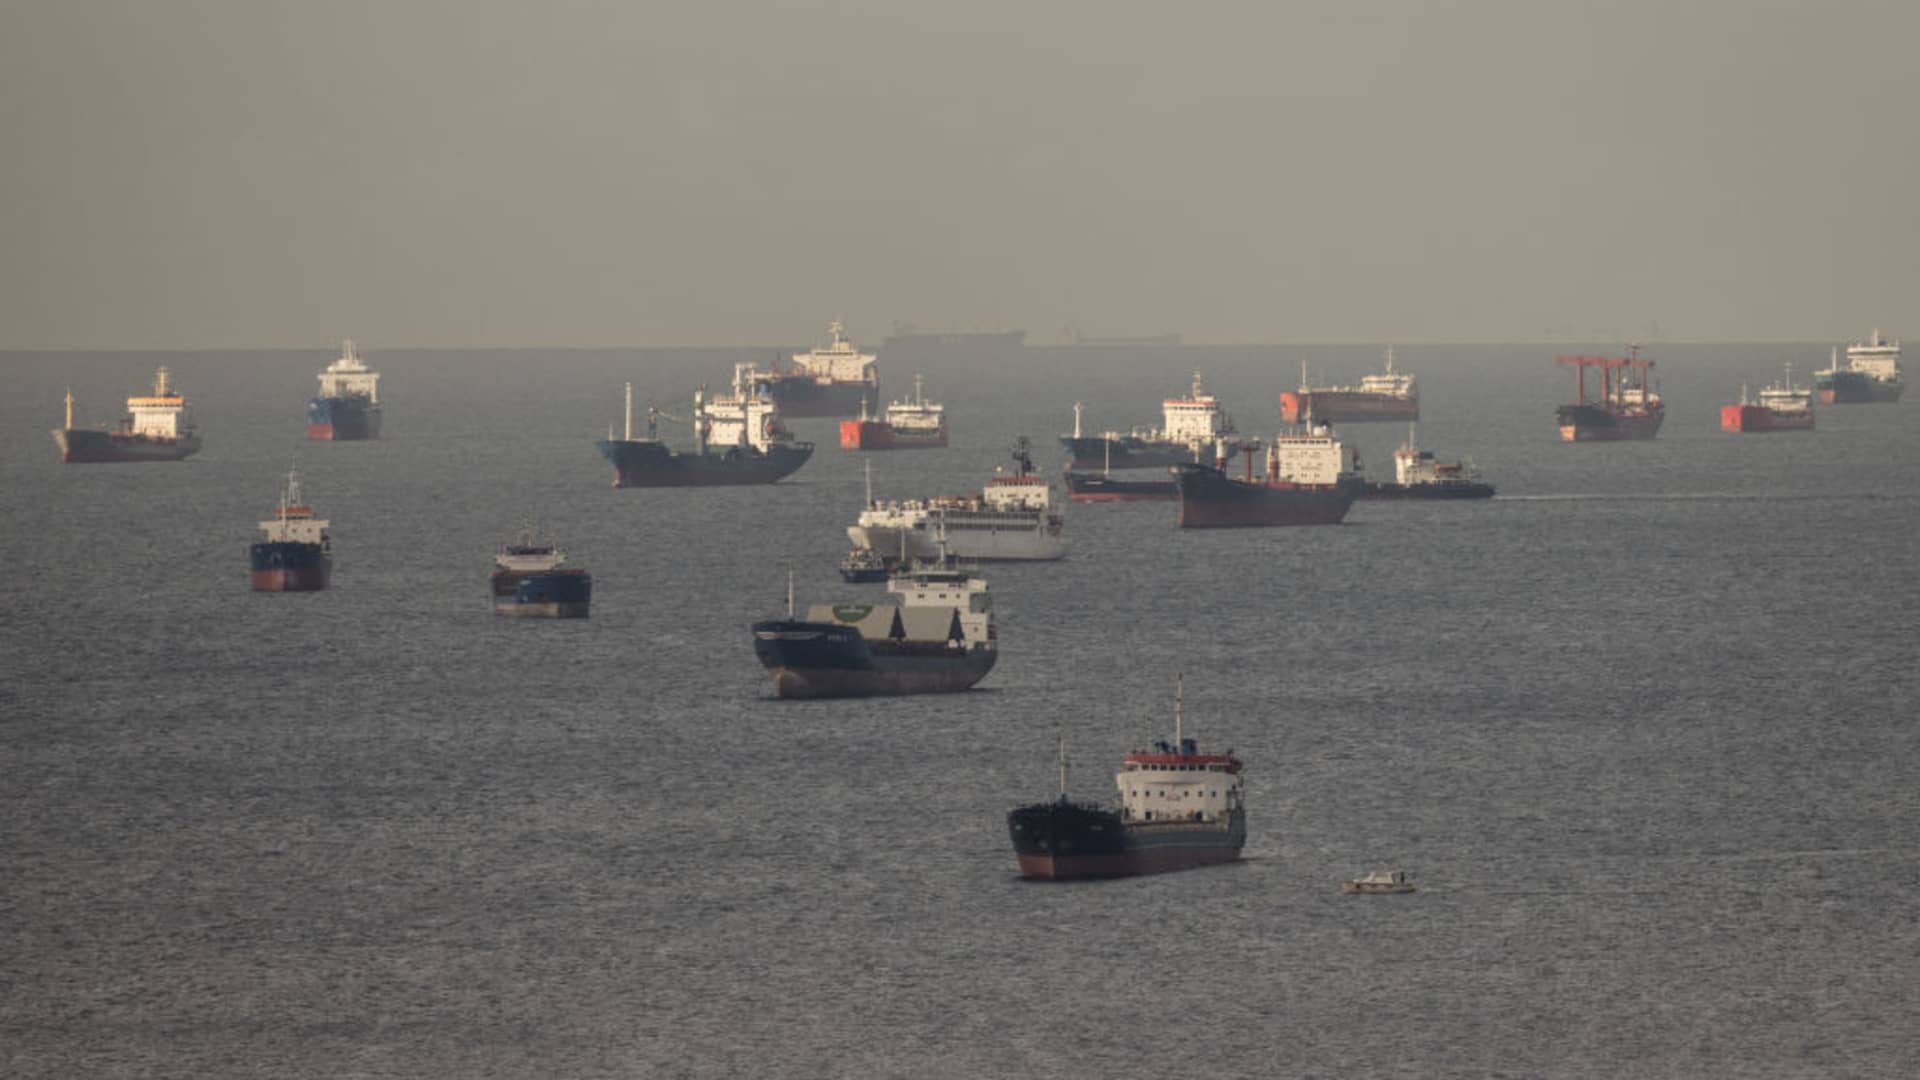 Ships, including those carrying grain from Ukraine and awaiting inspections are seen anchored off the Istanbul coastline on October 14, 2022 in Istanbul, Turkey.